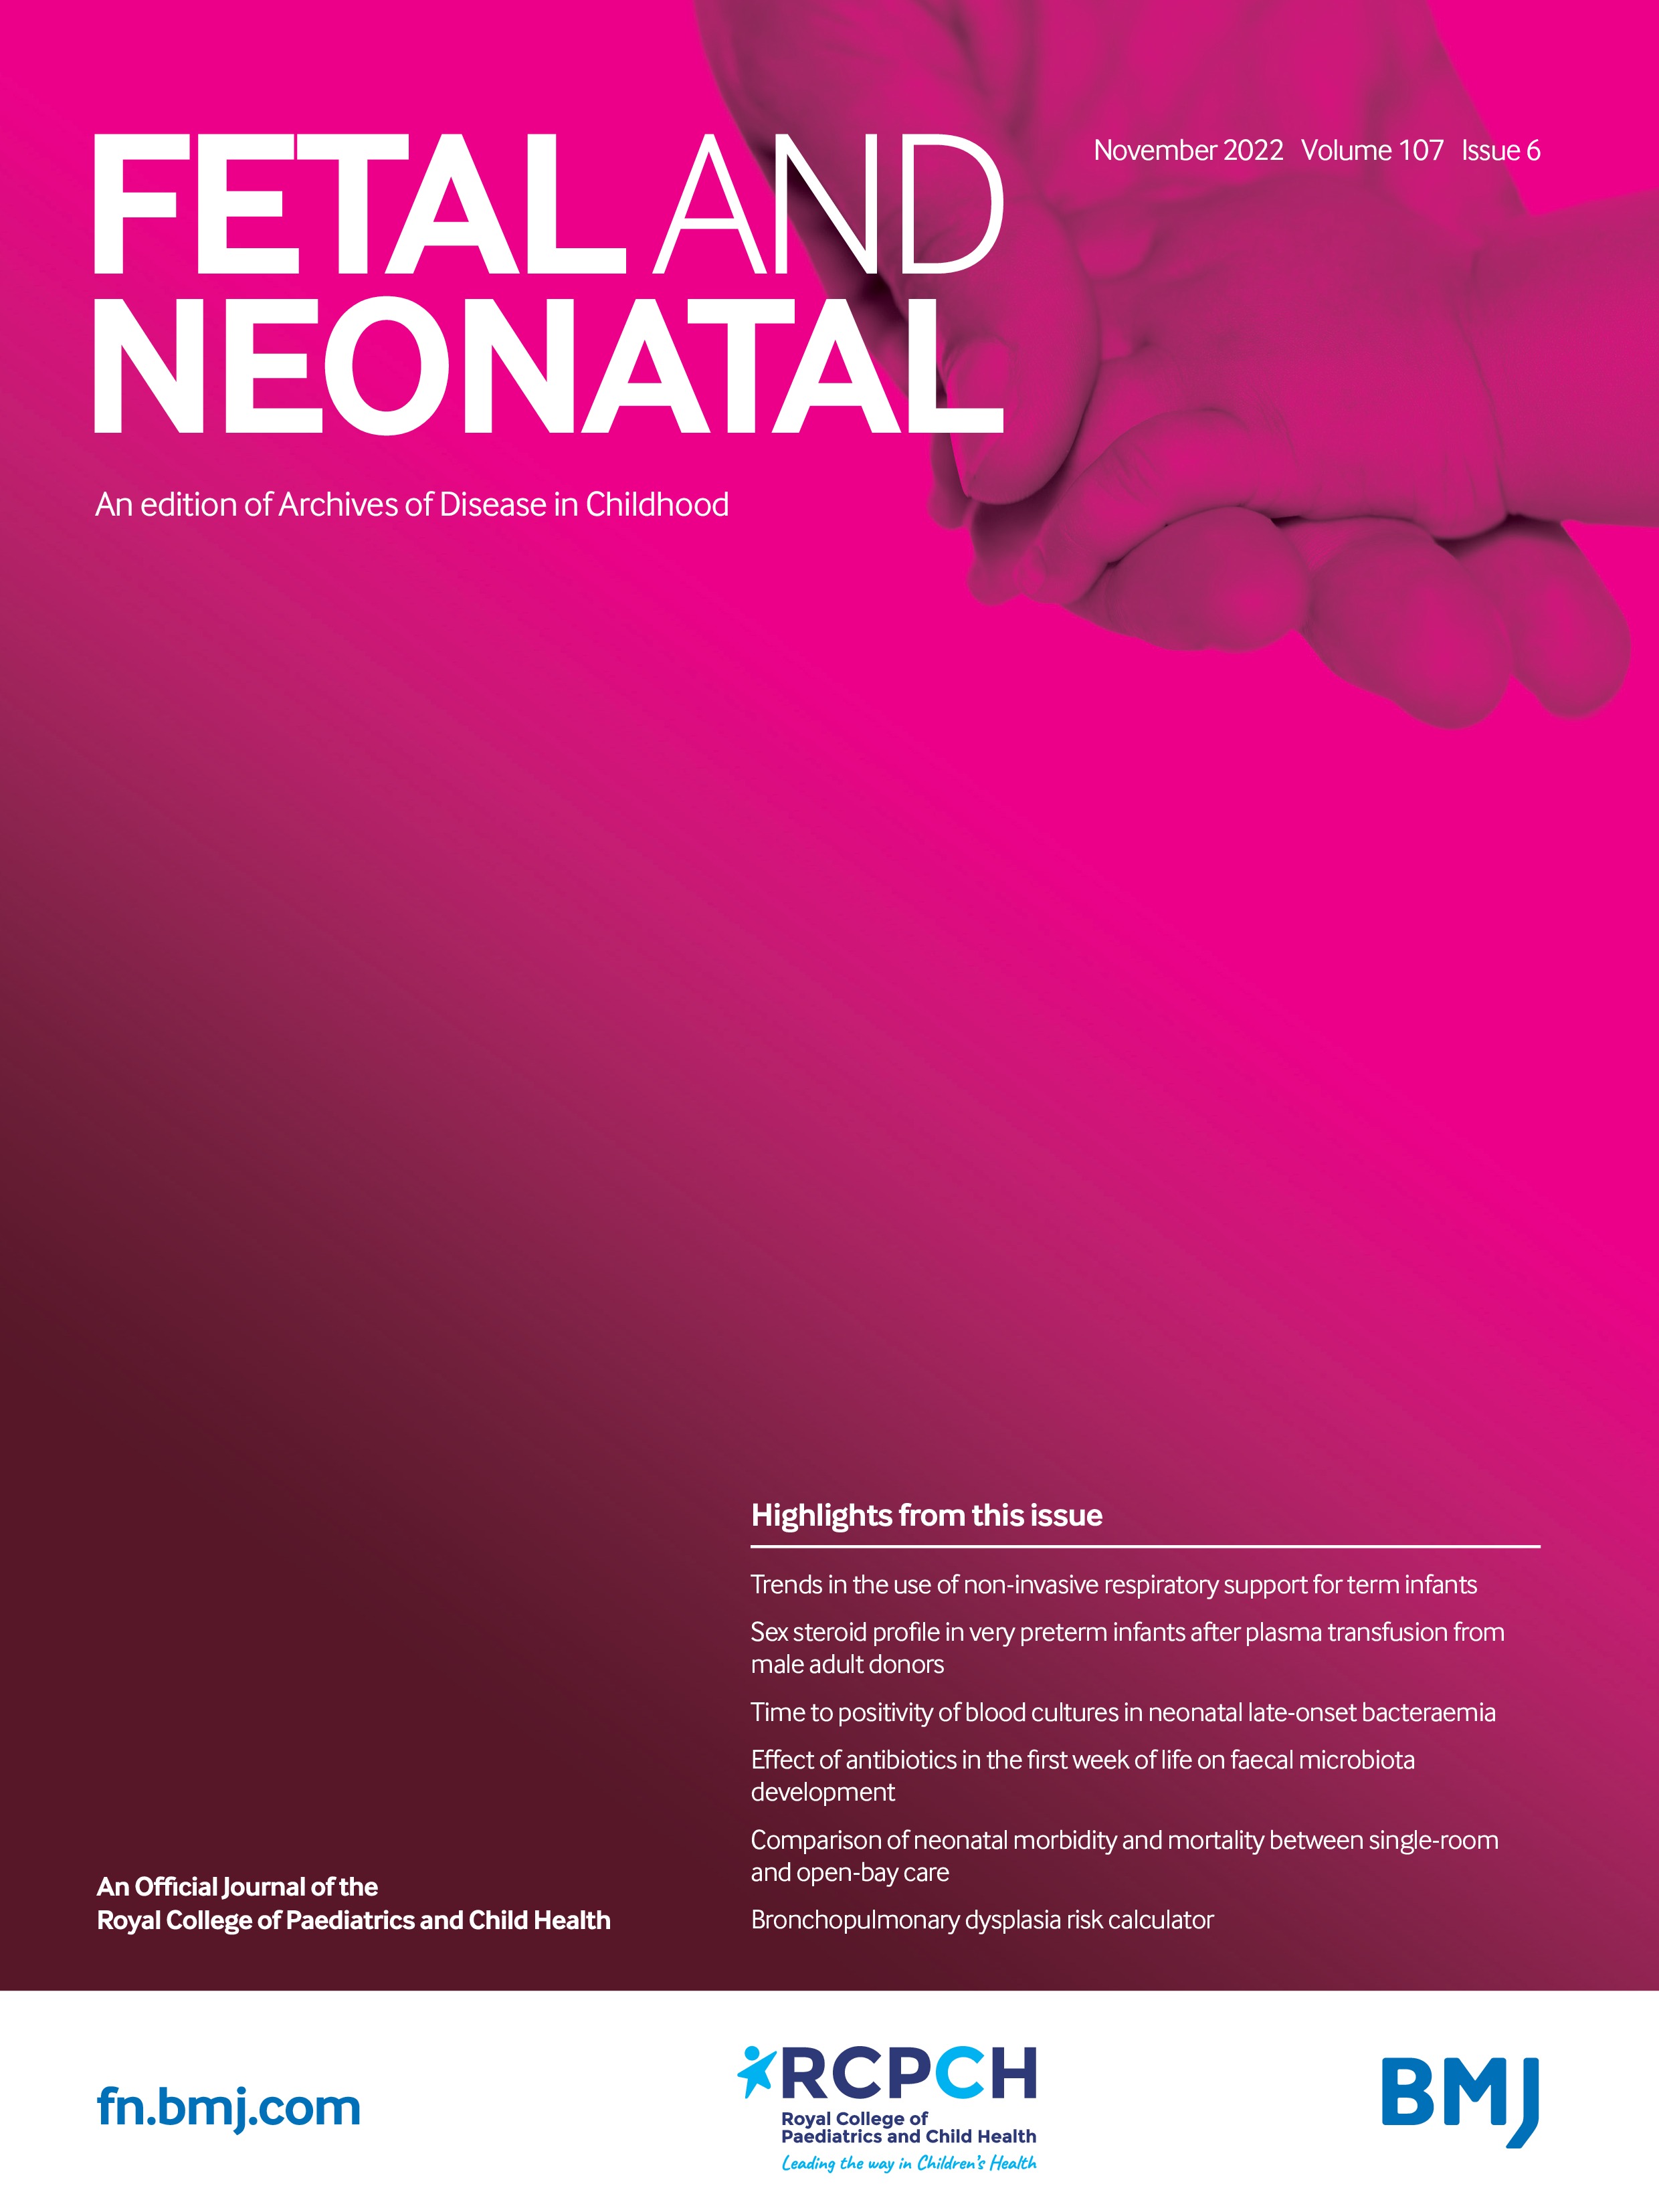 Respiratory function monitoring to improve the outcomes following neonatal resuscitation: a systematic review and meta-analysis